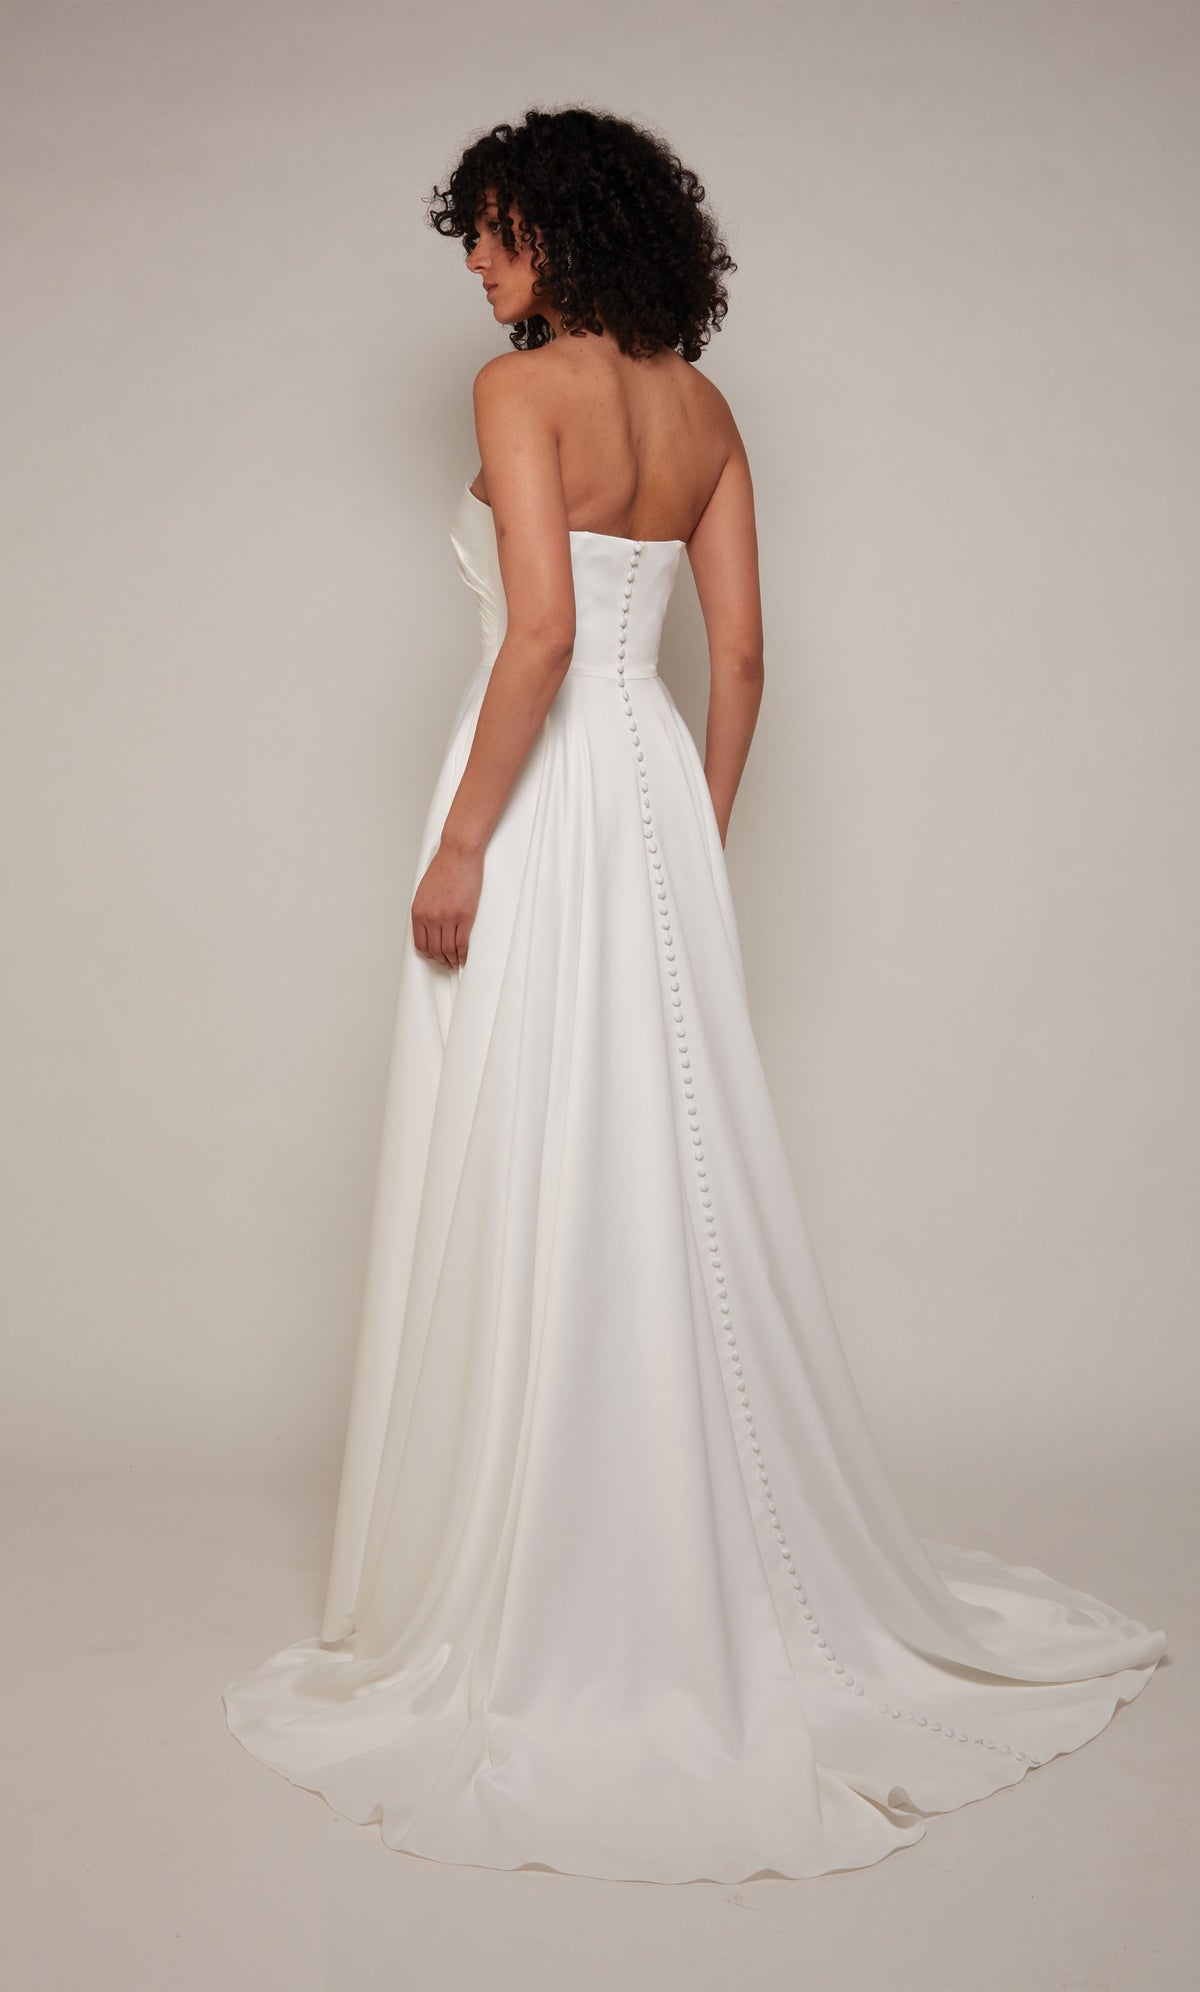 A-line satin bridal gown featuring a strapless, semi-sweetheart neckline, a pleated bodice, and high side slit. Satin covered buttons cascade down the back of the dress from the top to the end of the elegant train.